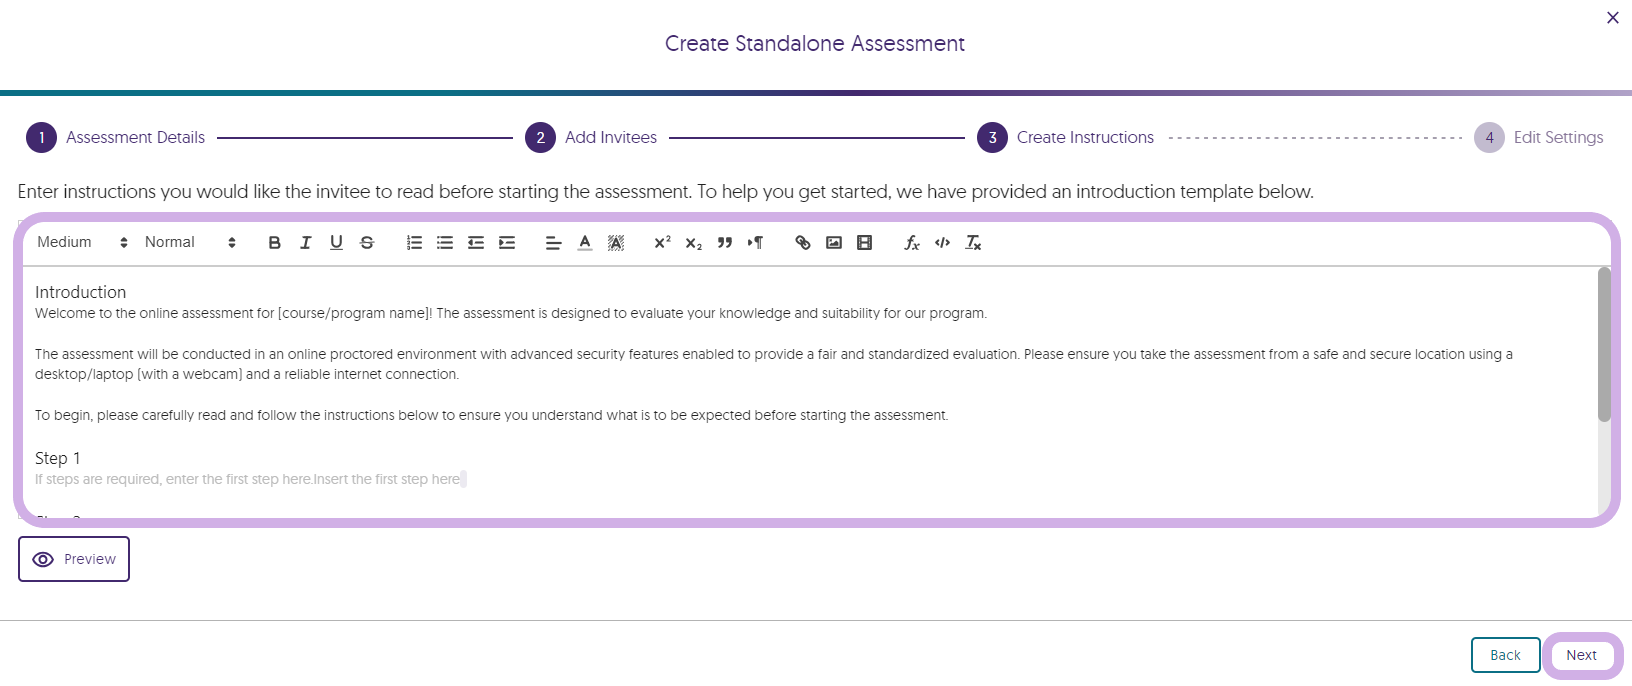 The Create Instructions section for the standalone assessment.